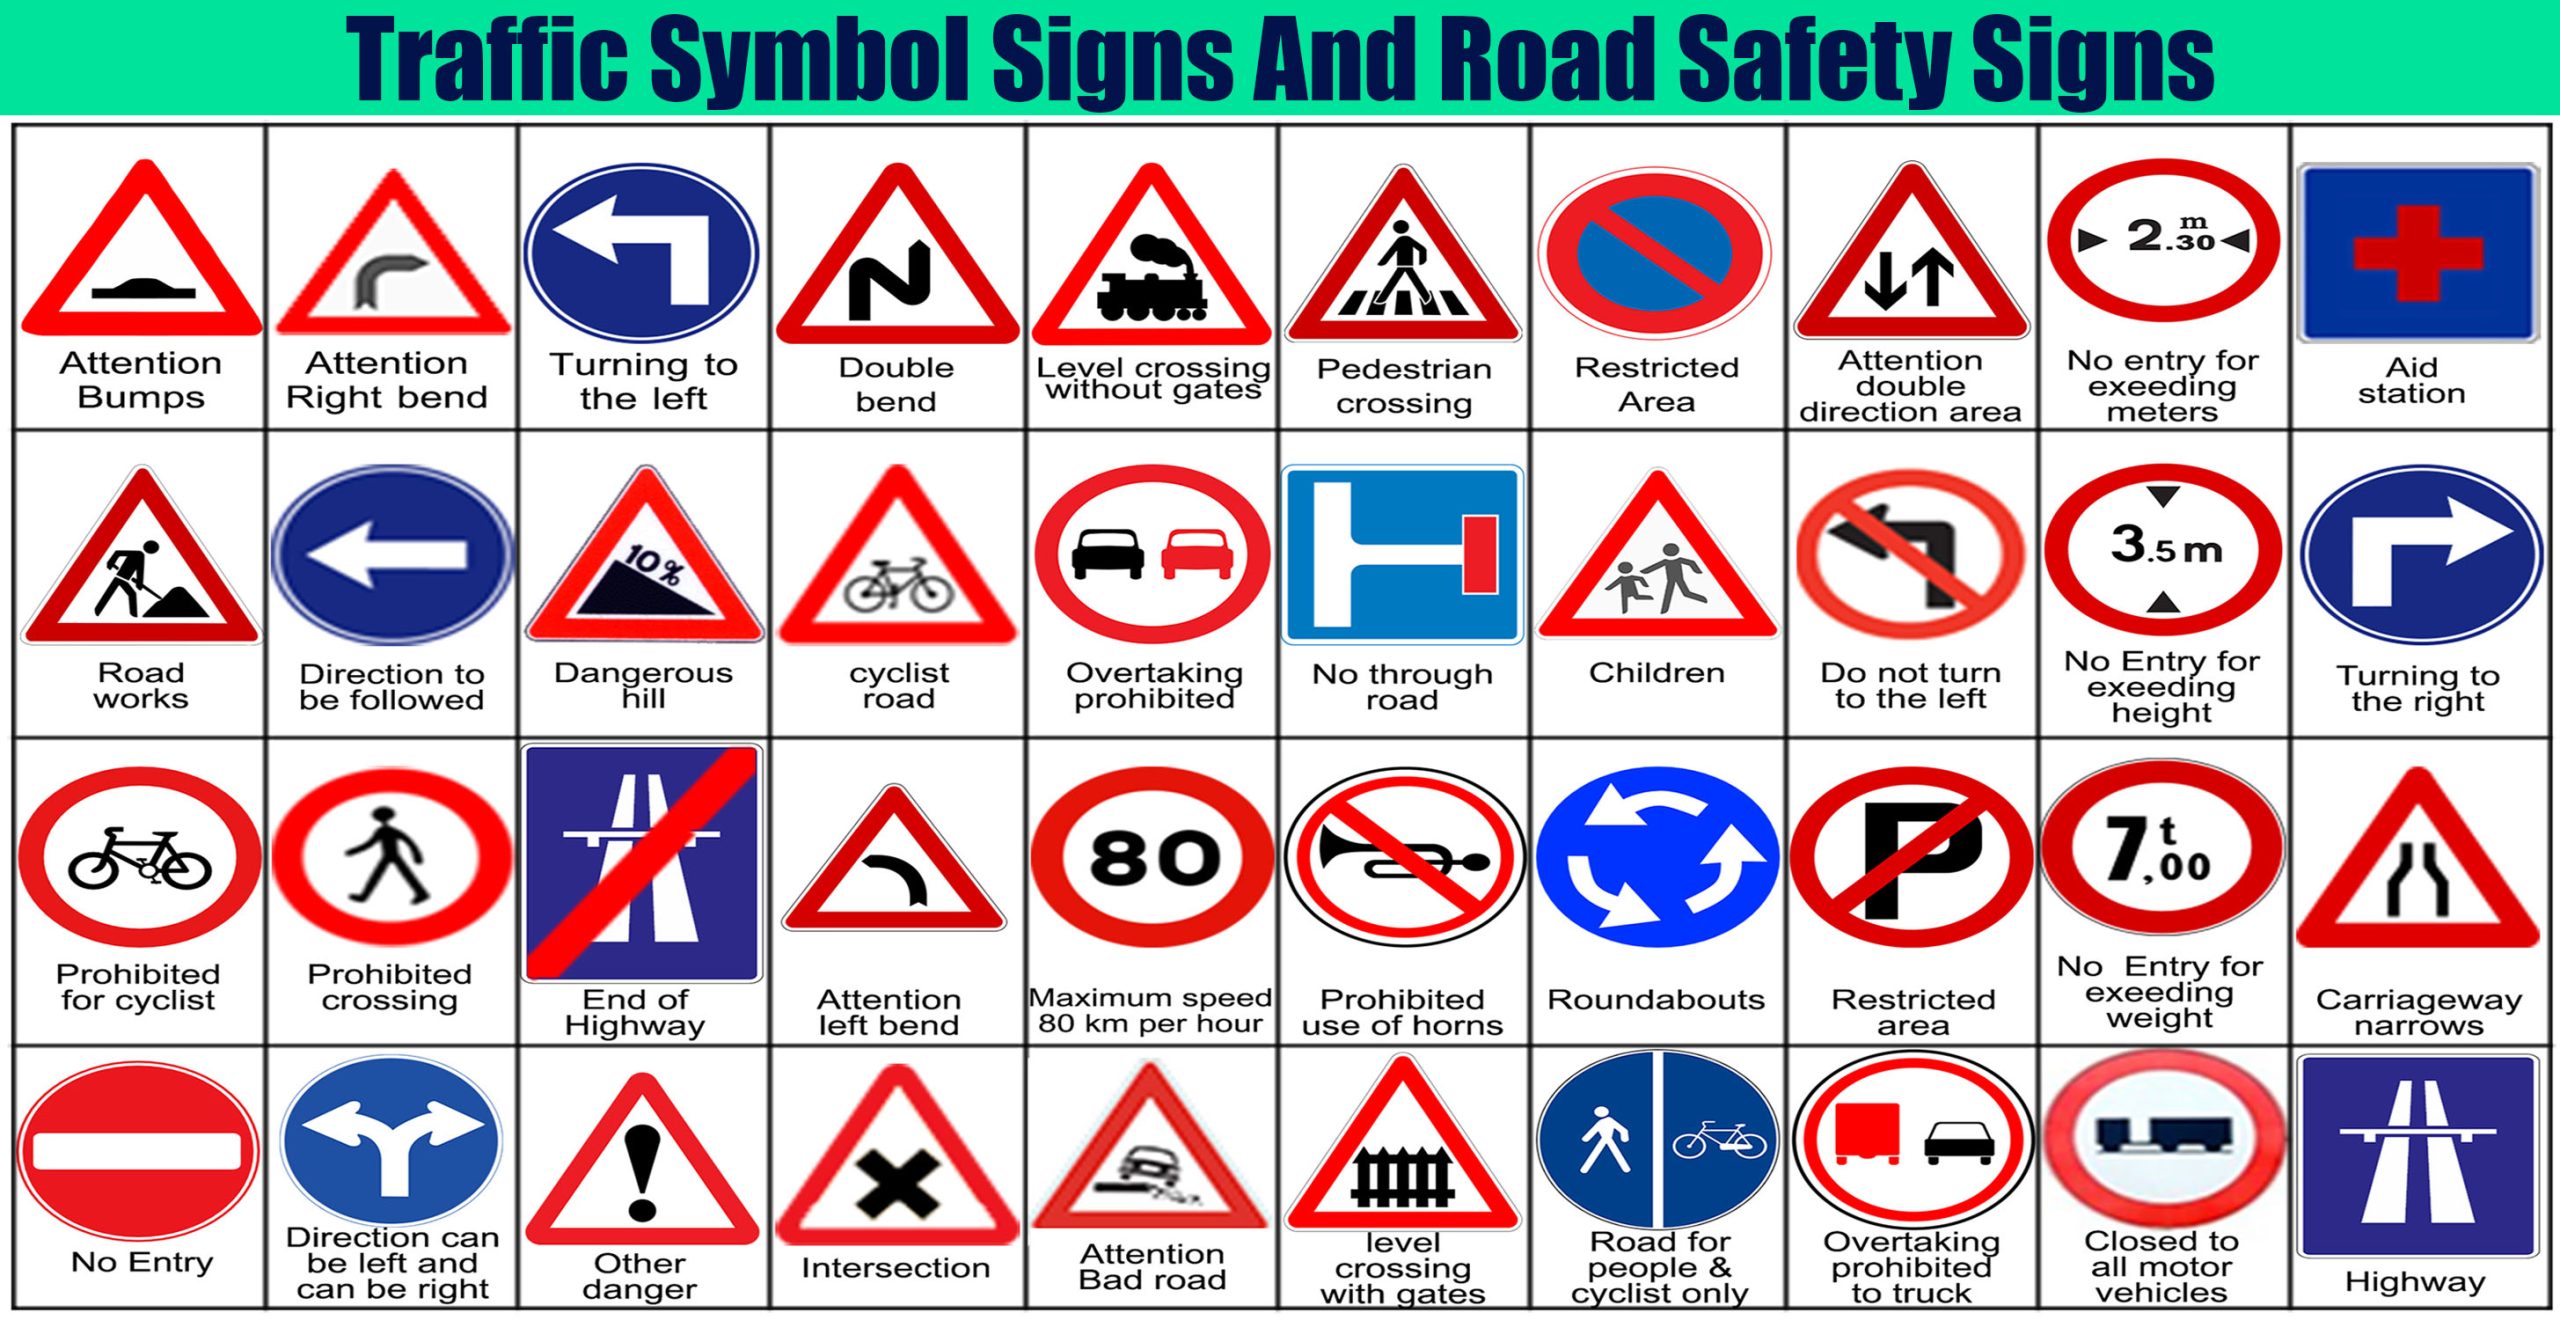 Traffic Symbol Signs And Road Safety Signs